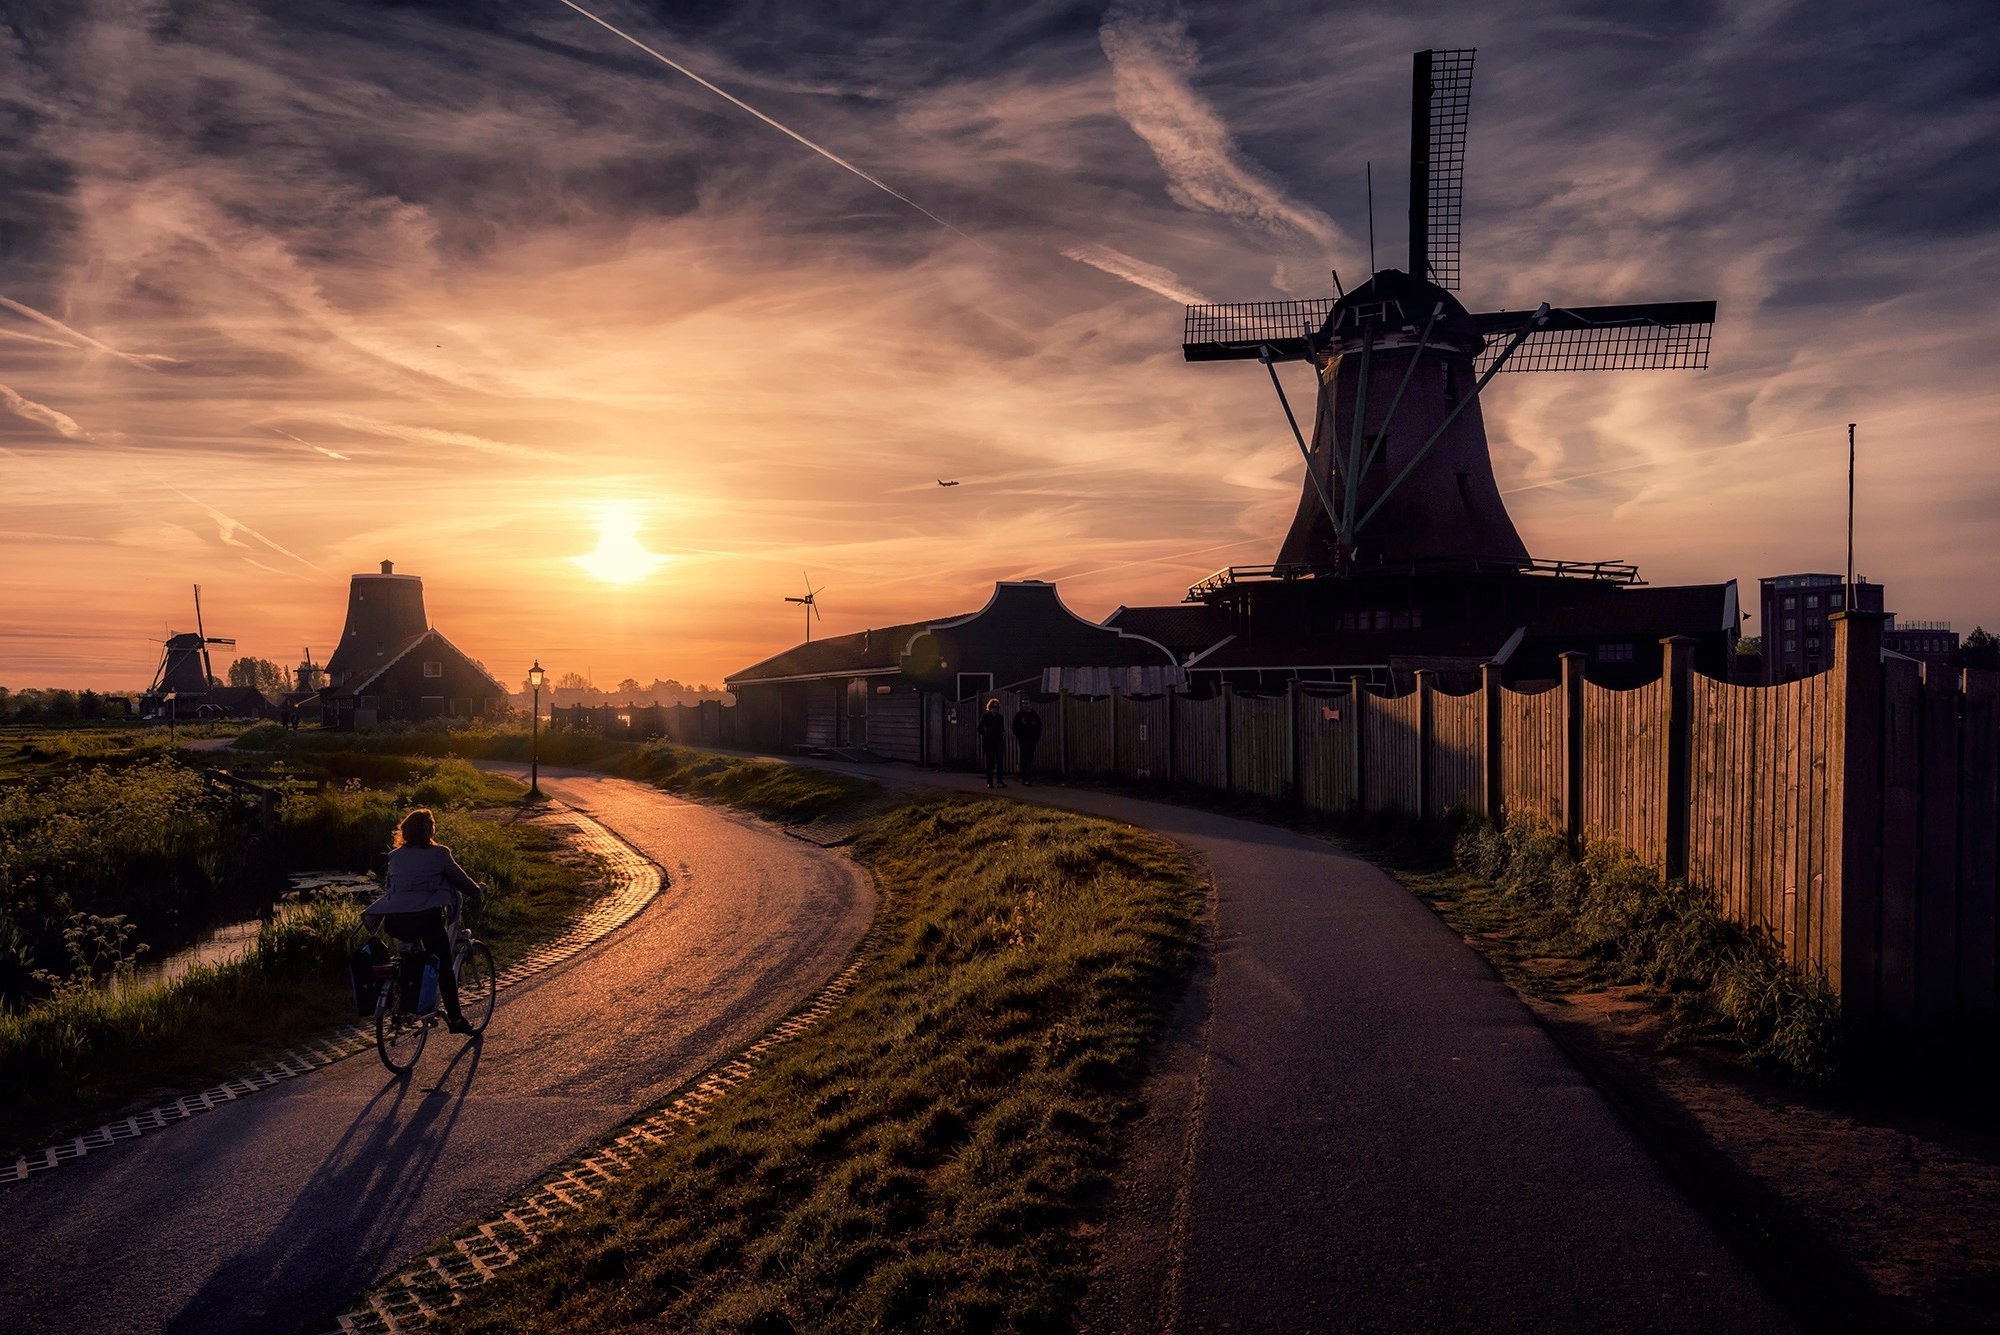 sunset, Windmills, Road, Fence, Path, Building, Clouds, Netherlands Wallpaper